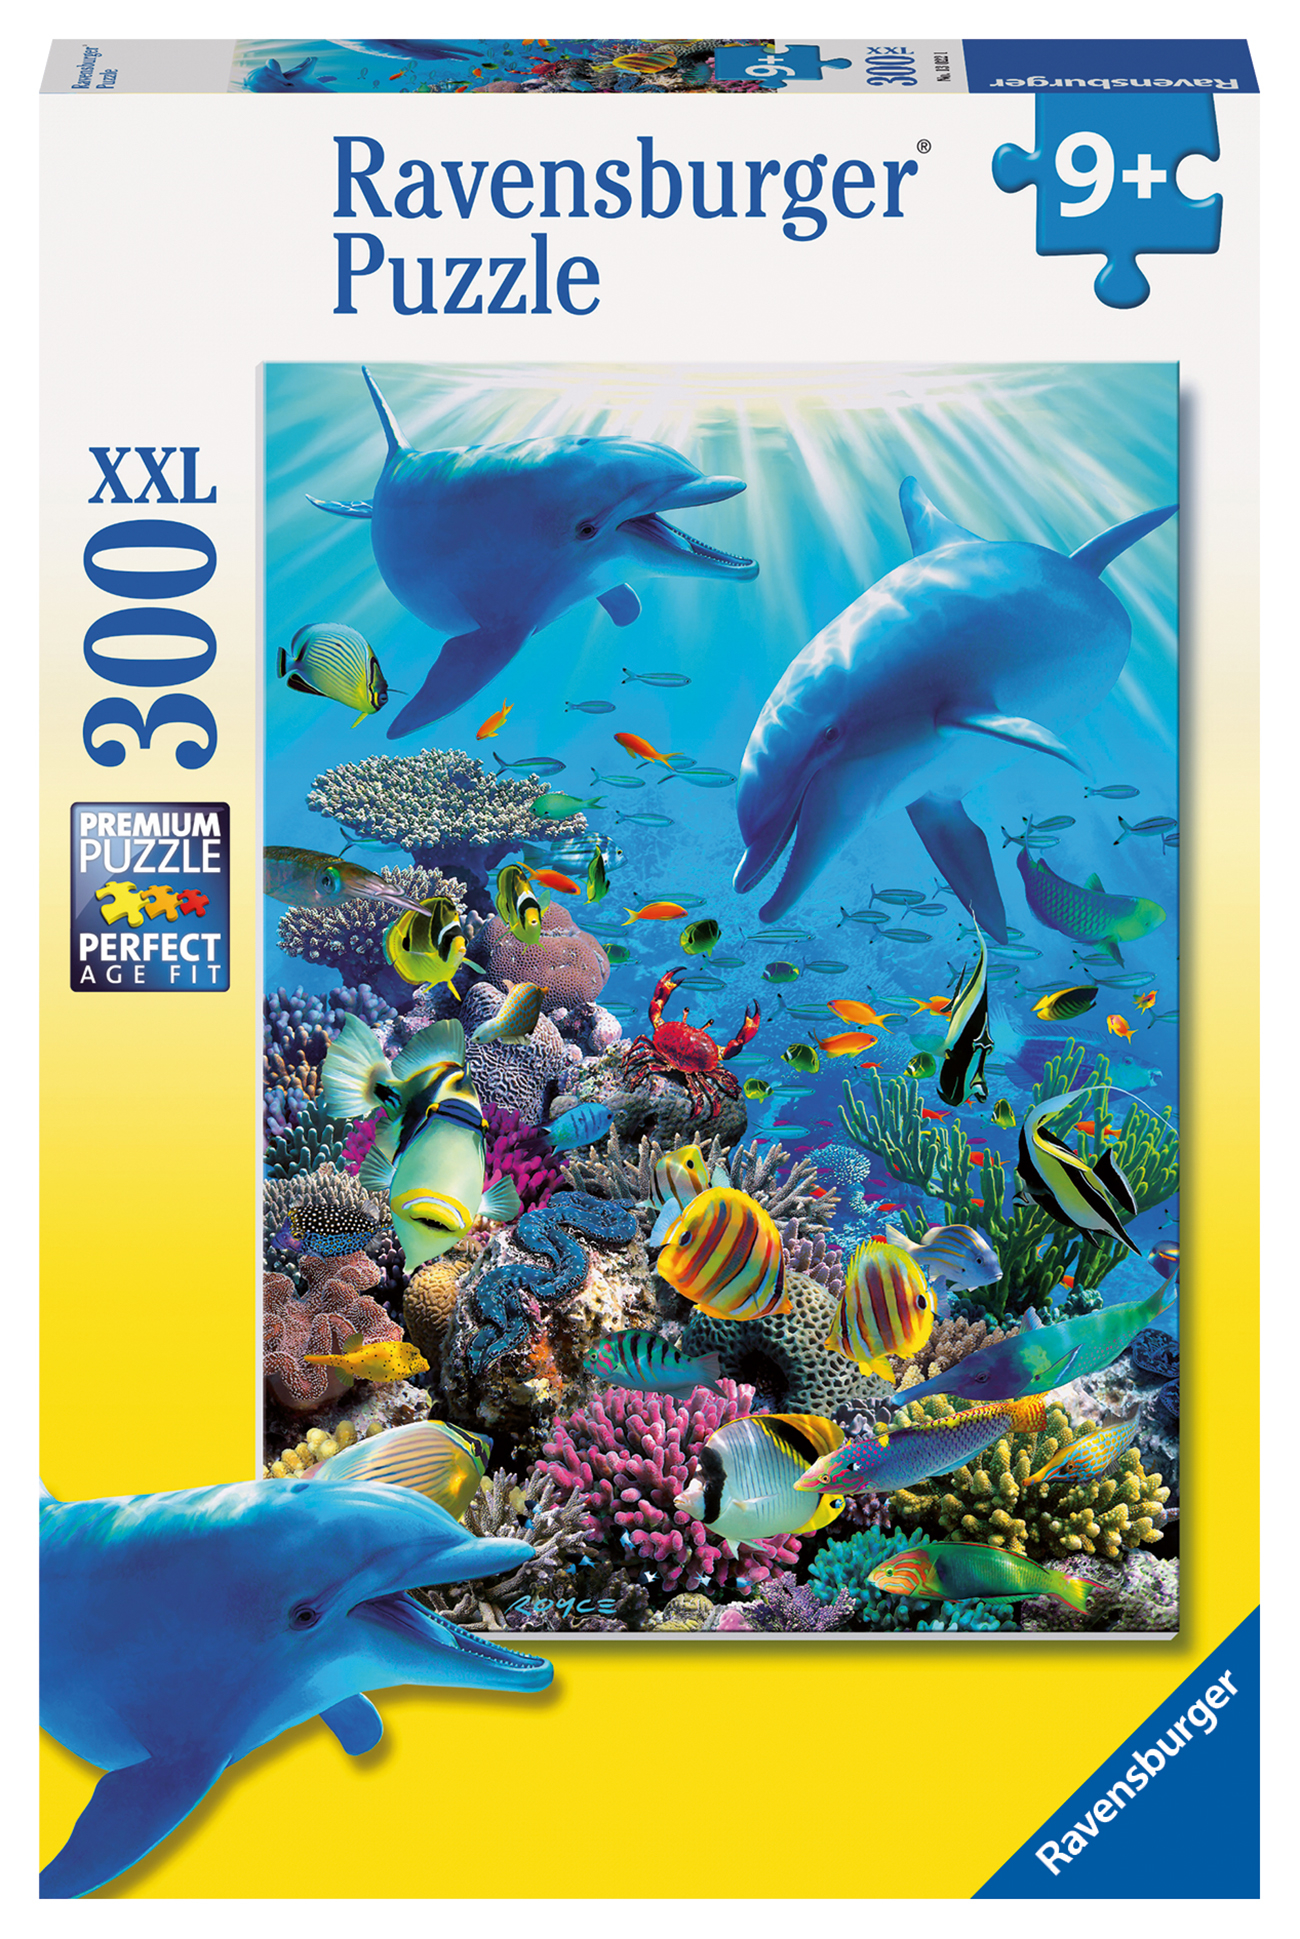 Ravensburger - Underwater Adventure - 300 Piece Large Format Jigsaw Puzzle - image 1 of 2